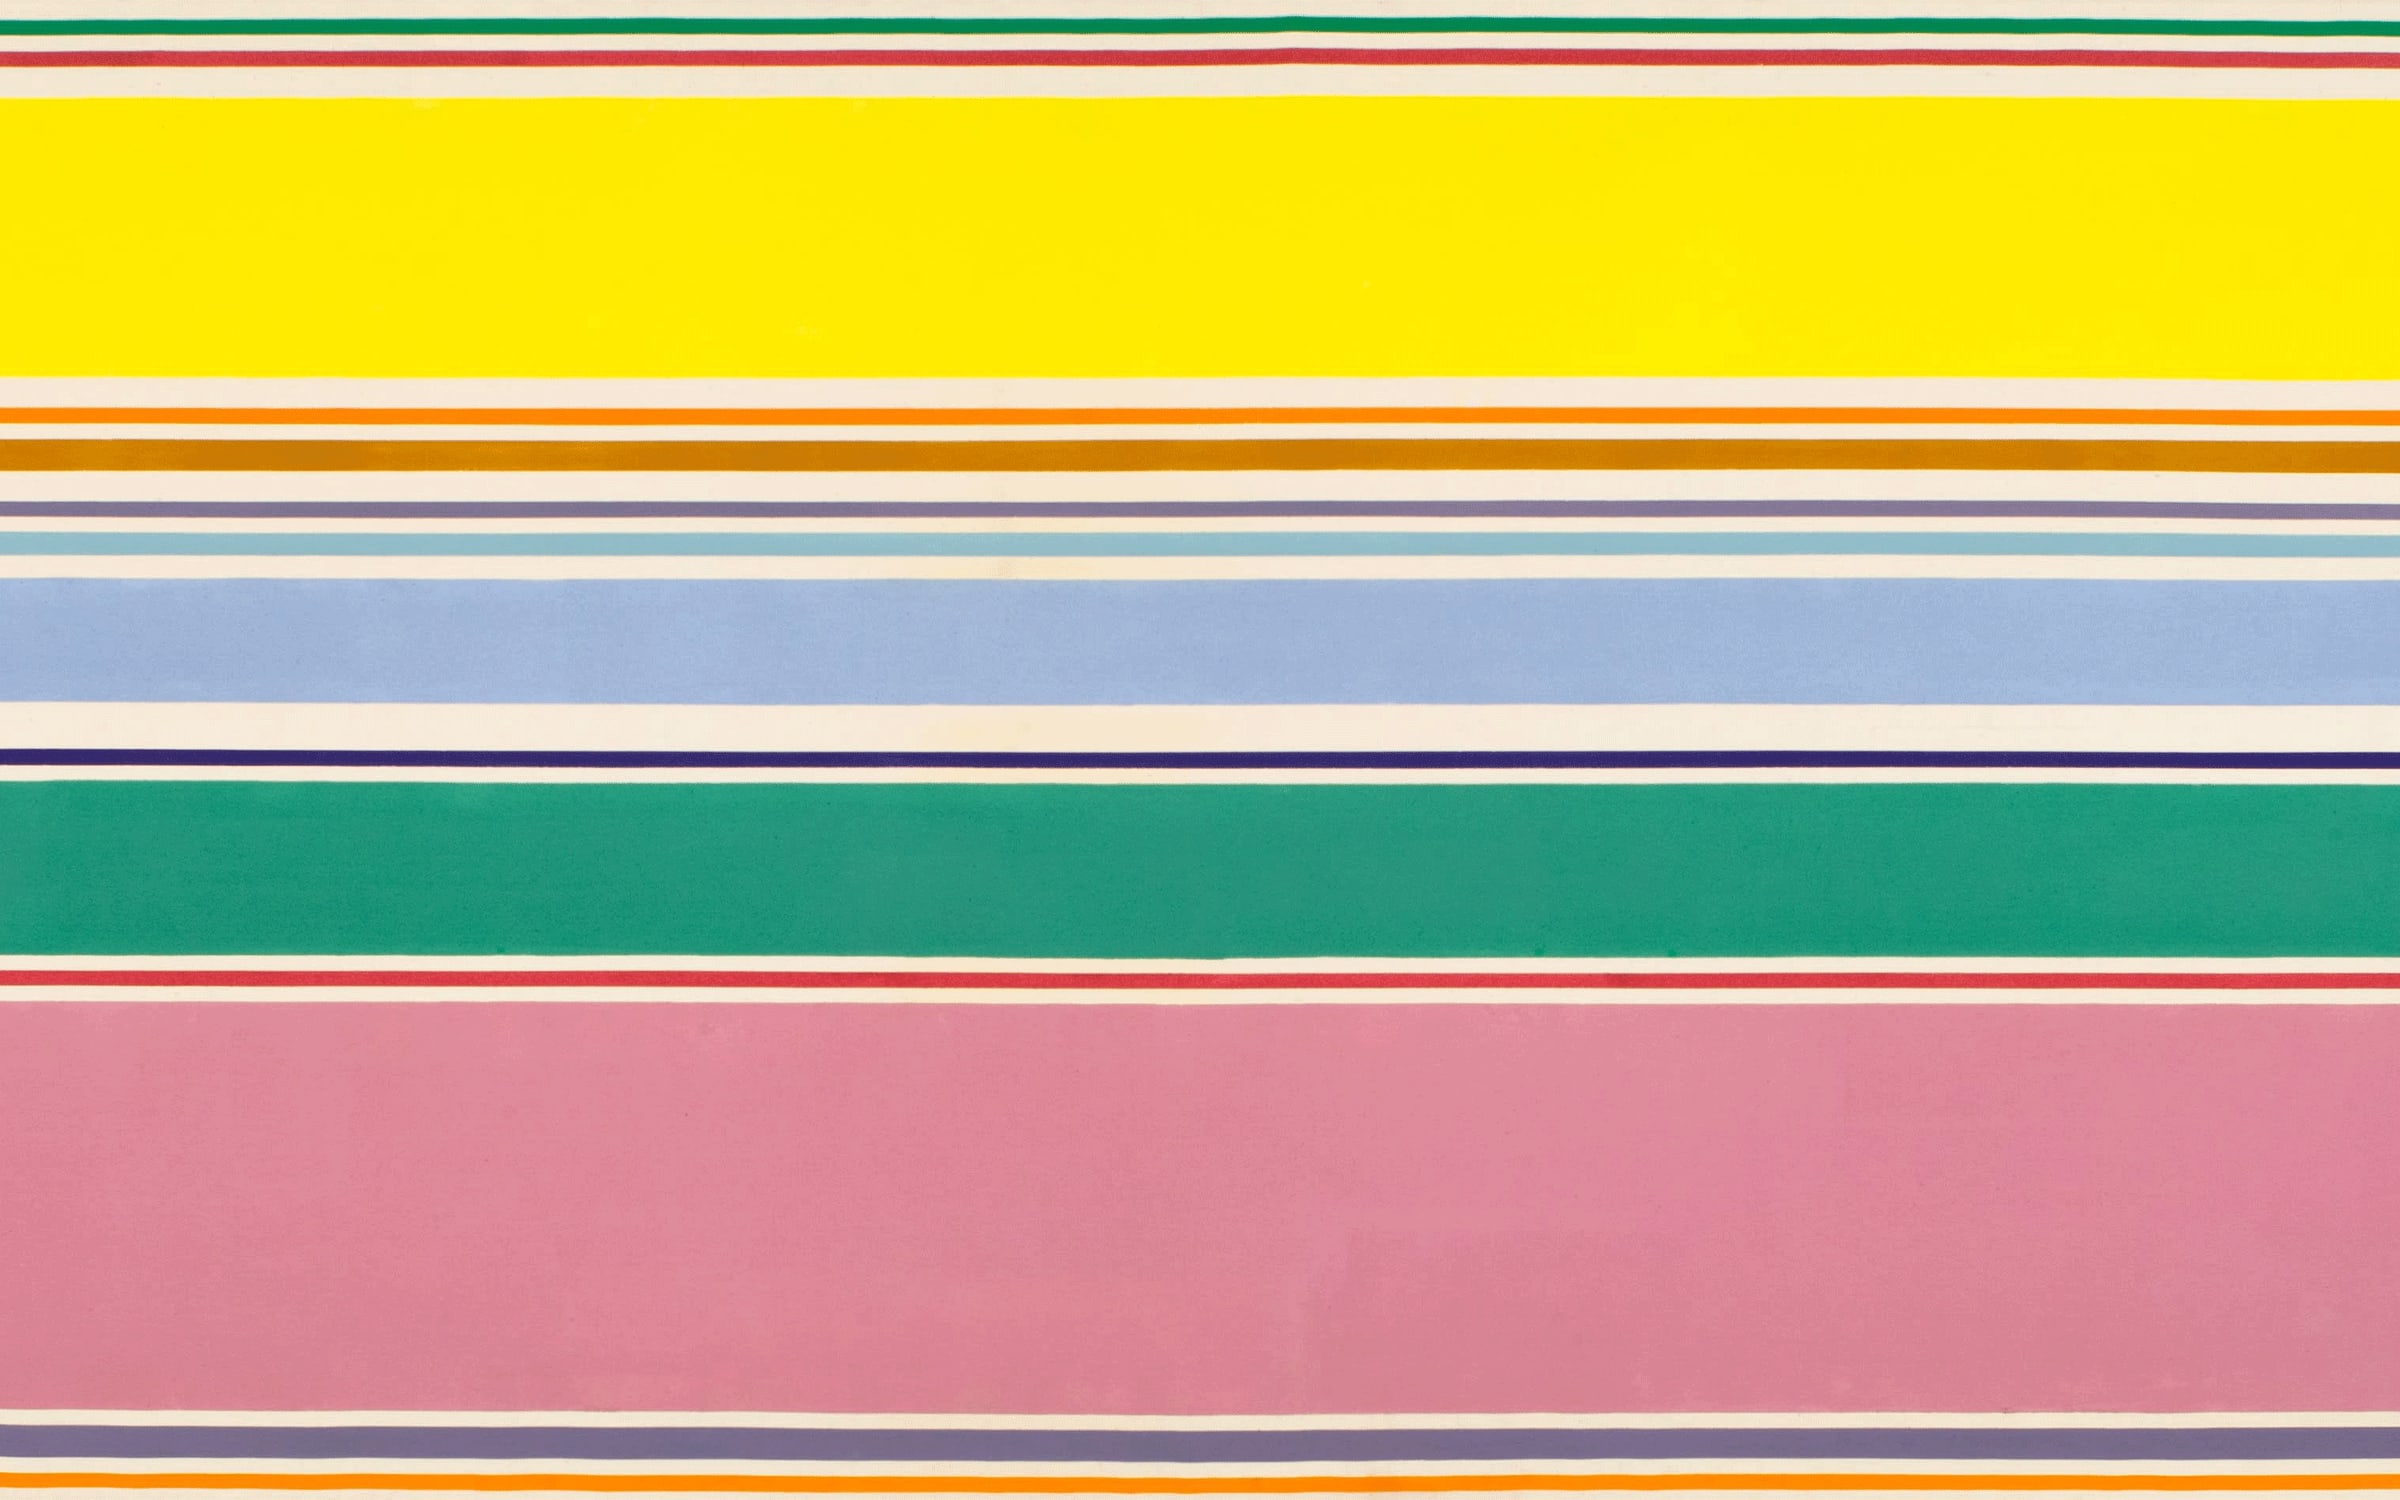 Kenneth Noland, Color Pane, 1967. Courtesy of the artist's estate and Yares Art.